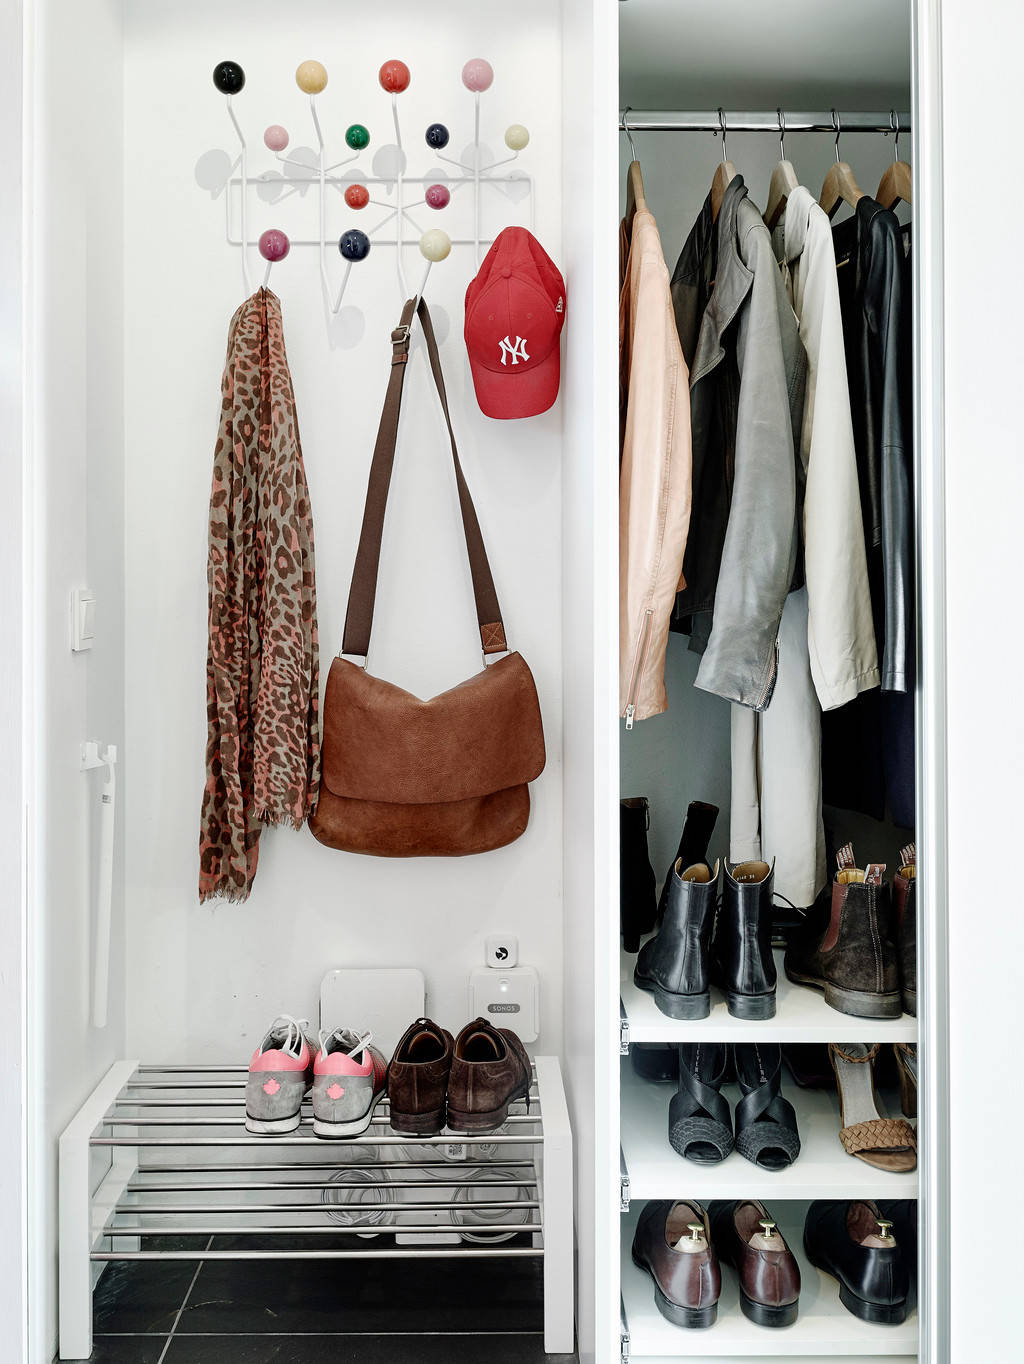 47 Smart Shoe Storage Ideas to Save Space